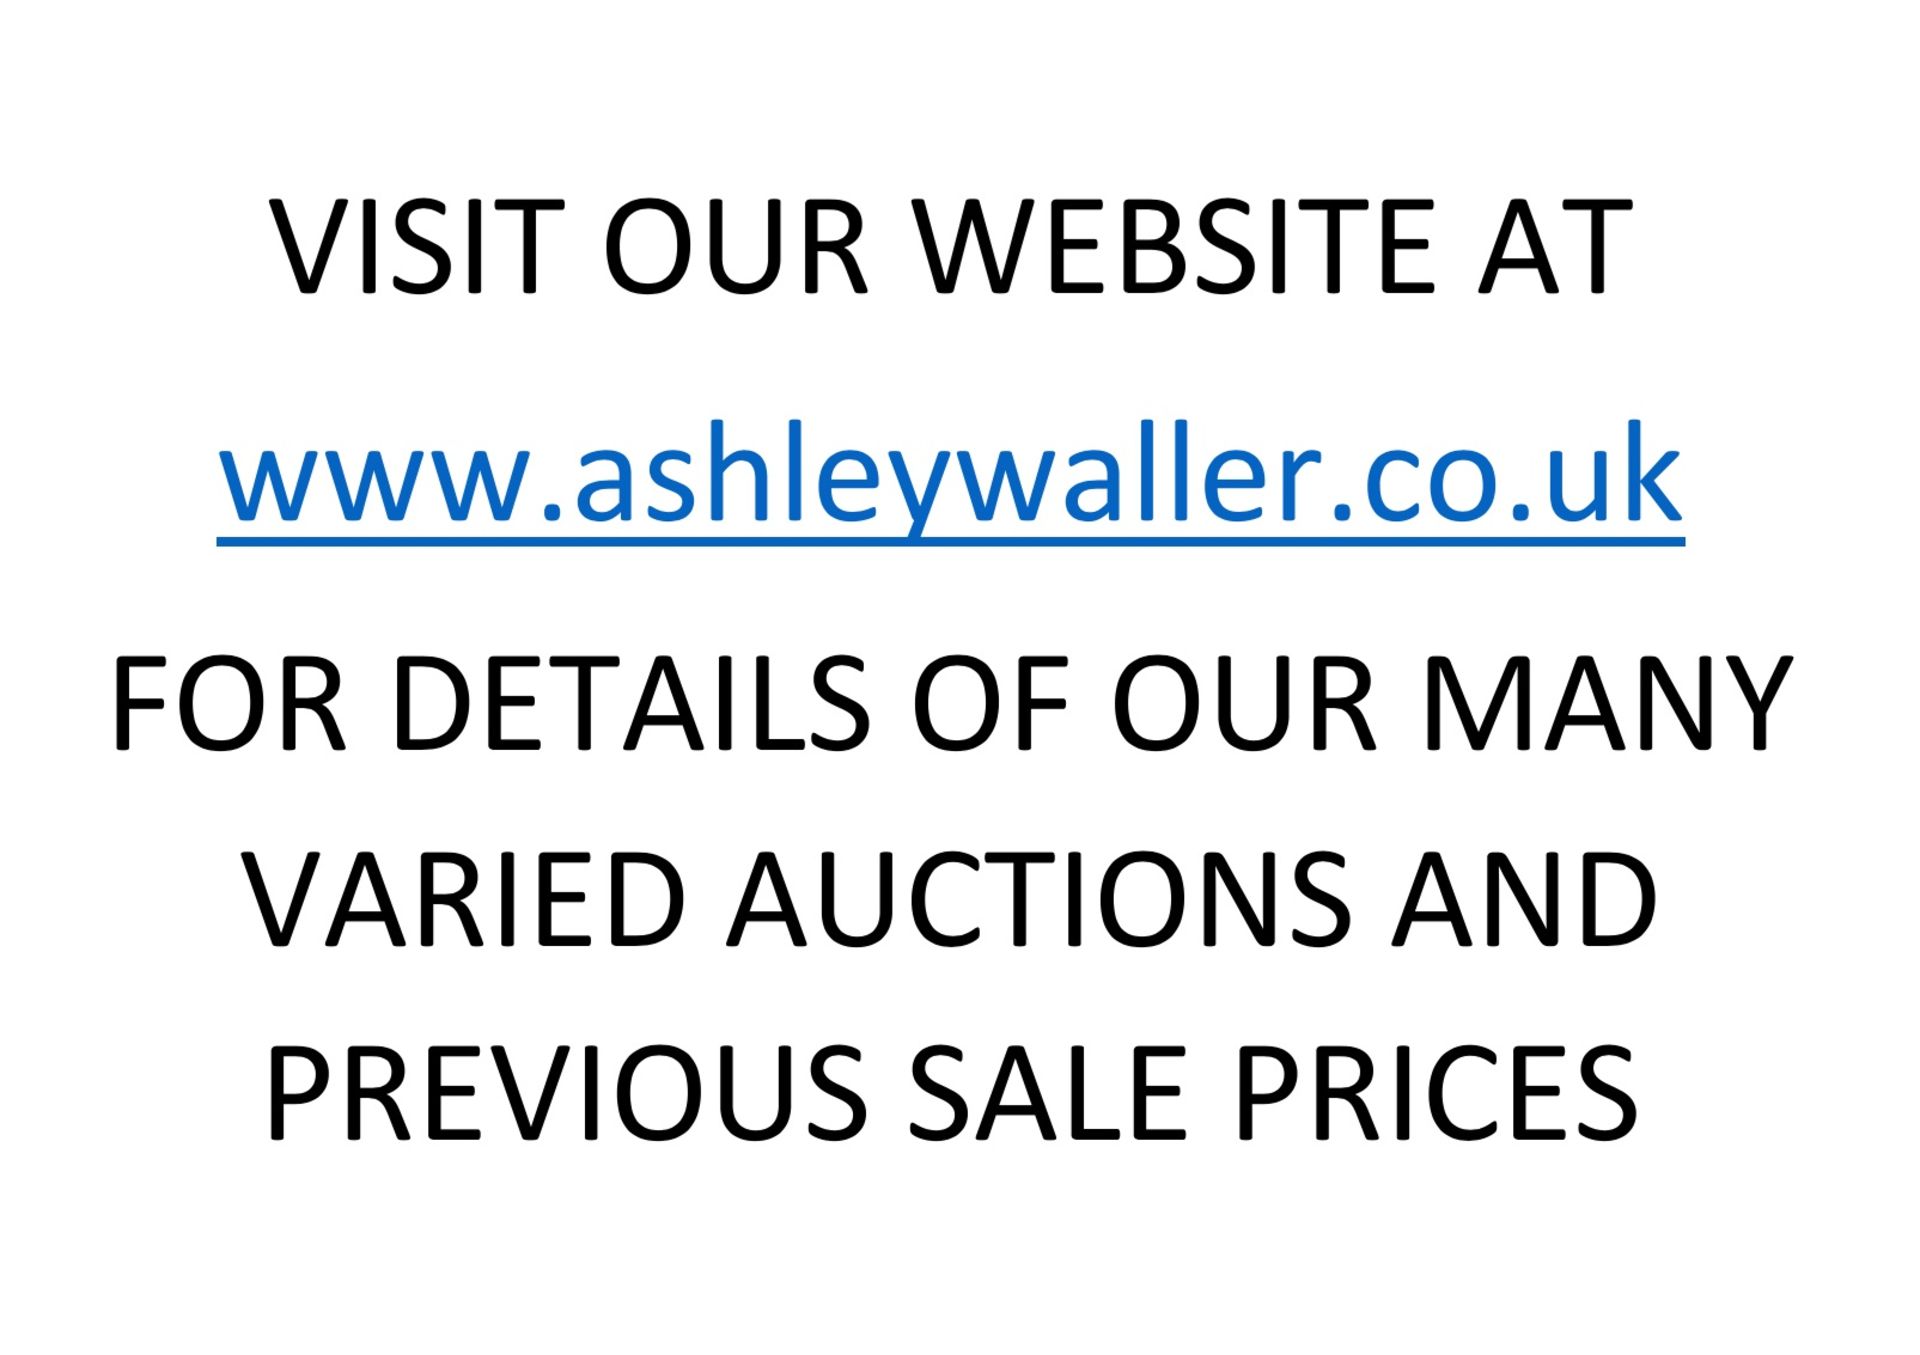 END OF SALE. THANK YOU FOR YOUR BIDDING, OUR NEXT MONTHLY MACHINERY AUCTION IS TUESDAY 8TH AUGUST